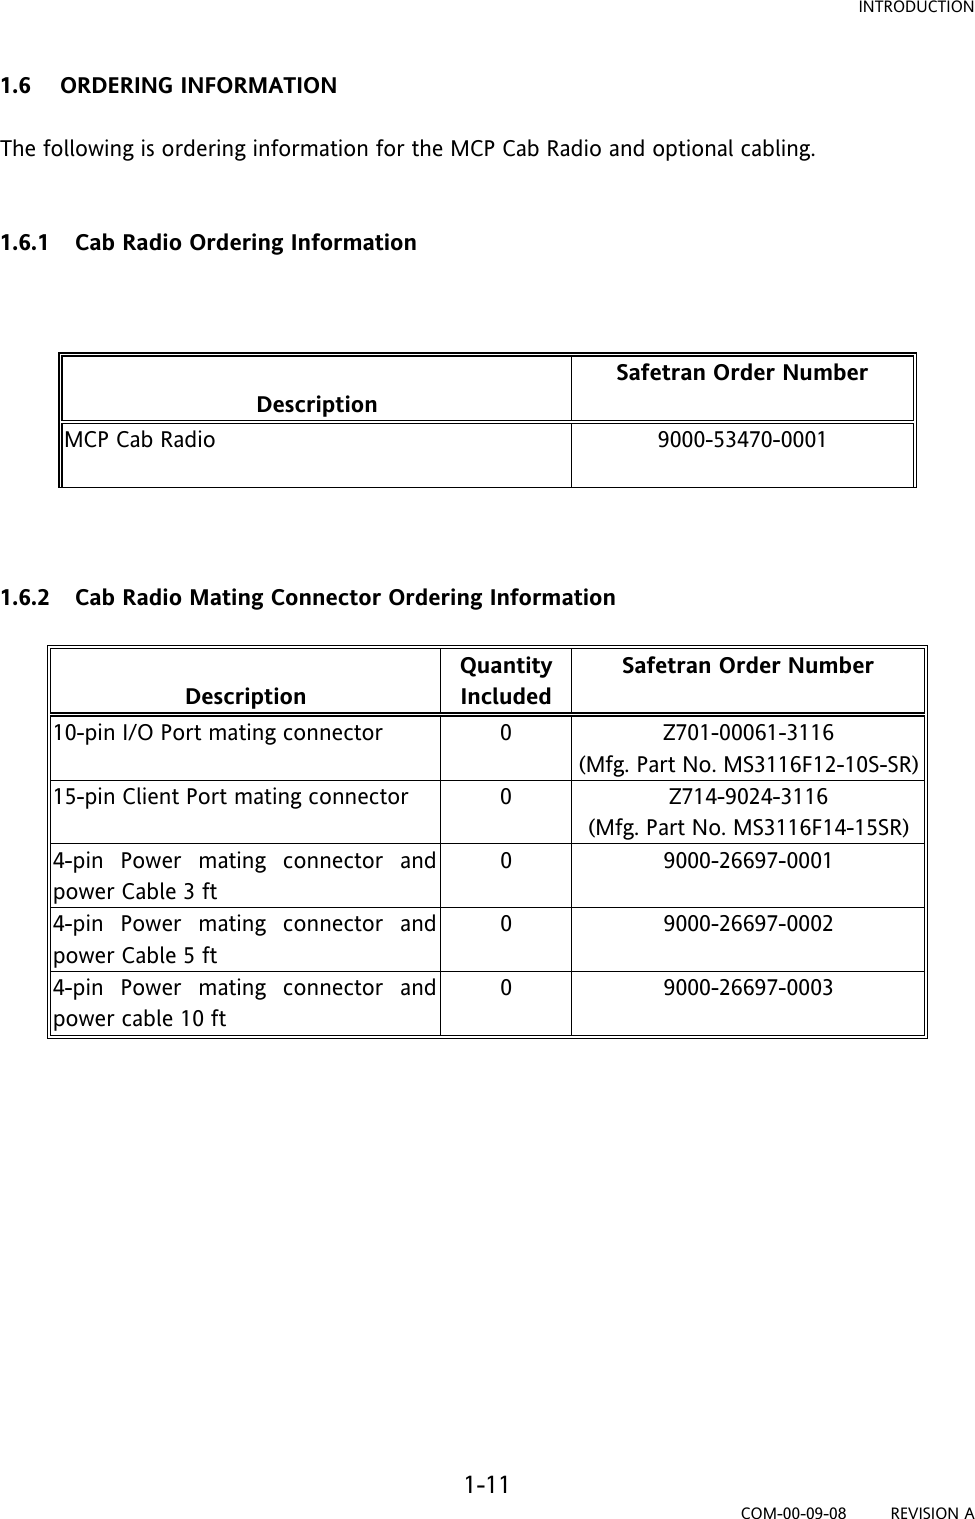 INTRODUCTION 1-11 COM-00-09-08         REVISION A 1.6 ORDERING INFORMATION  The following is ordering information for the MCP Cab Radio and optional cabling.    1.6.1 Cab Radio Ordering Information     Description Safetran Order Number MCP Cab Radio  9000-53470-0001     1.6.2 Cab Radio Mating Connector Ordering Information   Description Quantity Included Safetran Order Number 10-pin I/O Port mating connector  0  Z701-00061-3116 (Mfg. Part No. MS3116F12-10S-SR) 15-pin Client Port mating connector  0  Z714-9024-3116 (Mfg. Part No. MS3116F14-15SR) 4-pin Power mating connector and power Cable 3 ft 0 9000-26697-0001 4-pin Power mating connector and power Cable 5 ft 0 9000-26697-0002 4-pin Power mating connector and power cable 10 ft 0 9000-26697-0003              